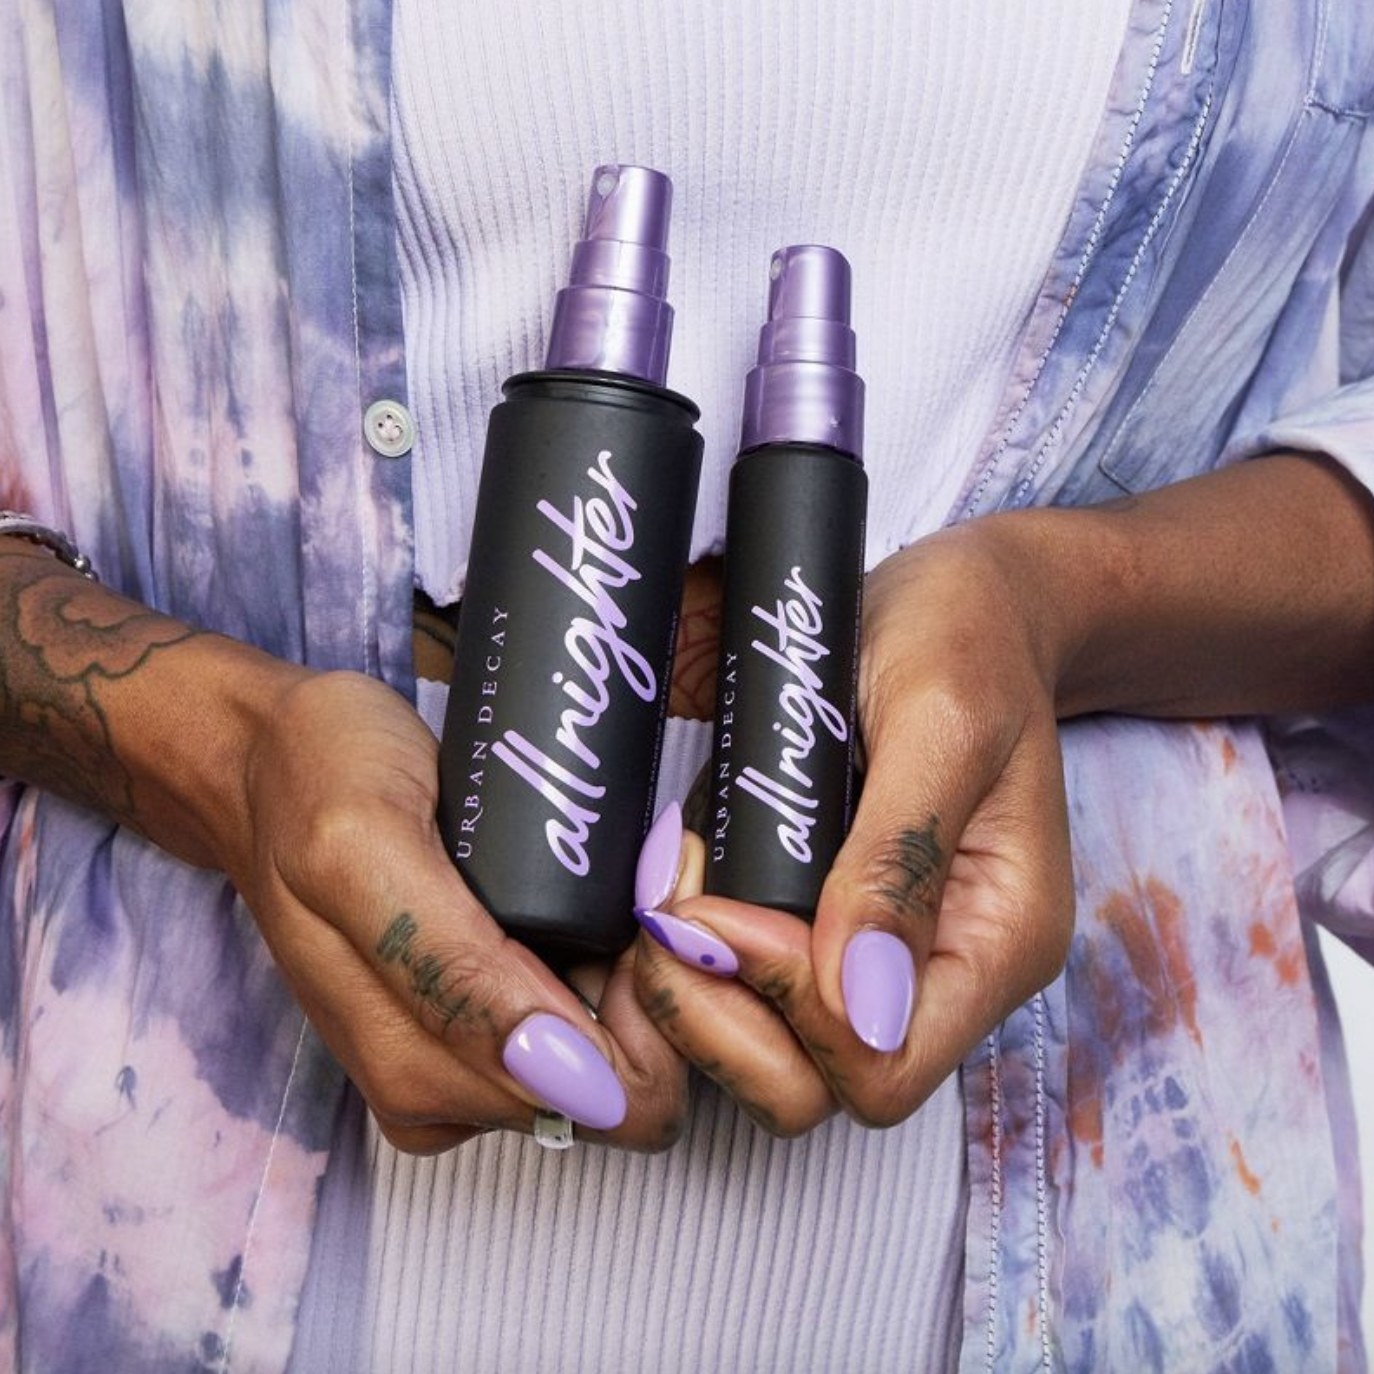 A person with a purple manicure, holding two bottle of makeup setting spray